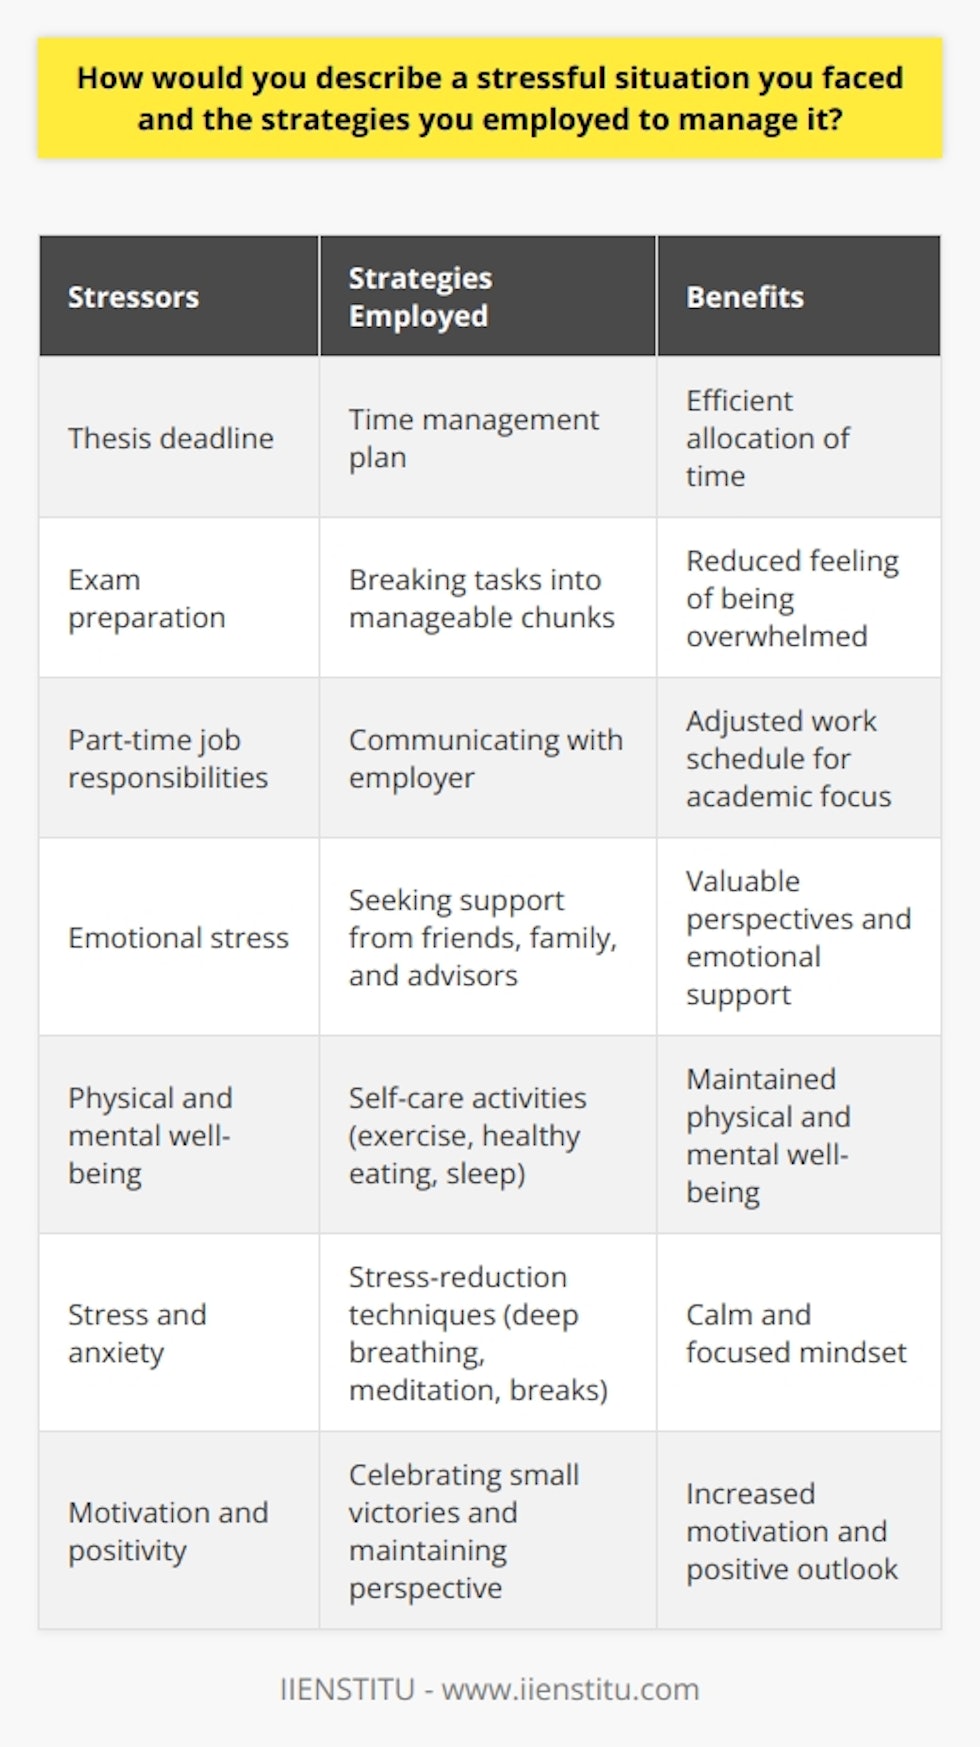 One of the most stressful situations I faced was during my final year of university. I had to complete my thesis, study for exams, and manage my part-time job simultaneously. The pressure to perform well in all areas was overwhelming, and I found myself struggling to cope with the demands on my time and energy. Identifying the Sources of Stress To effectively manage the stressful situation, I first identified the primary sources of my stress. These included the looming deadlines for my thesis, the extensive course material I needed to study for exams, and the responsibilities of my part-time job. By recognizing these stressors, I was able to develop targeted strategies to address each one. Developing a Time Management Plan I created a detailed time management plan to allocate my time effectively. I prioritized my tasks based on their urgency and importance, ensuring that I devoted sufficient time to my thesis and exam preparation. I also communicated with my employer to adjust my work schedule, allowing me to focus on my academic commitments. Breaking Tasks into Manageable Chunks To avoid feeling overwhelmed, I broke my thesis and exam preparation into smaller, manageable tasks. I set realistic goals for each day and week, focusing on making steady progress rather than attempting to tackle everything at once. This approach helped me maintain a sense of control and reduced my overall stress levels. Seeking Support and Maintaining Well-being I sought support from my friends, family, and academic advisors during this challenging period. Talking about my stress and concerns with others provided me with valuable perspectives and emotional support. I also prioritized self-care activities, such as regular exercise, healthy eating, and sufficient sleep, to maintain my physical and mental well-being. Practicing Stress-Reduction Techniques To further manage my stress, I incorporated stress-reduction techniques into my daily routine. These included deep breathing exercises, meditation, and short breaks to engage in activities I enjoyed. These practices helped me maintain a calm and focused mindset, enabling me to approach my tasks with greater clarity and resilience. Celebrating Small Victories and Maintaining Perspective Throughout the stressful period, I made a conscious effort to celebrate my small victories and progress. Acknowledging my accomplishments, no matter how small, helped me maintain motivation and a positive outlook. I also reminded myself that the stressful situation was temporary and that I had the skills and resources to overcome the challenges I faced. Reflecting on the Experience Looking back, the stressful situation I encountered during my final year of university taught me valuable lessons about resilience, adaptability, and the importance of self-care. By employing effective stress management strategies, seeking support, and maintaining a positive mindset, I was able to successfully navigate the challenges and emerge stronger and more confident in my abilities. In conclusion, facing a stressful situation requires a proactive and multifaceted approach. By identifying stressors, developing a time management plan, seeking support, and practicing stress-reduction techniques, individuals can effectively manage stress and maintain their well-being. It is essential to remember that stressful situations are temporary and that with the right strategies and mindset, one can overcome even the most challenging circumstances.